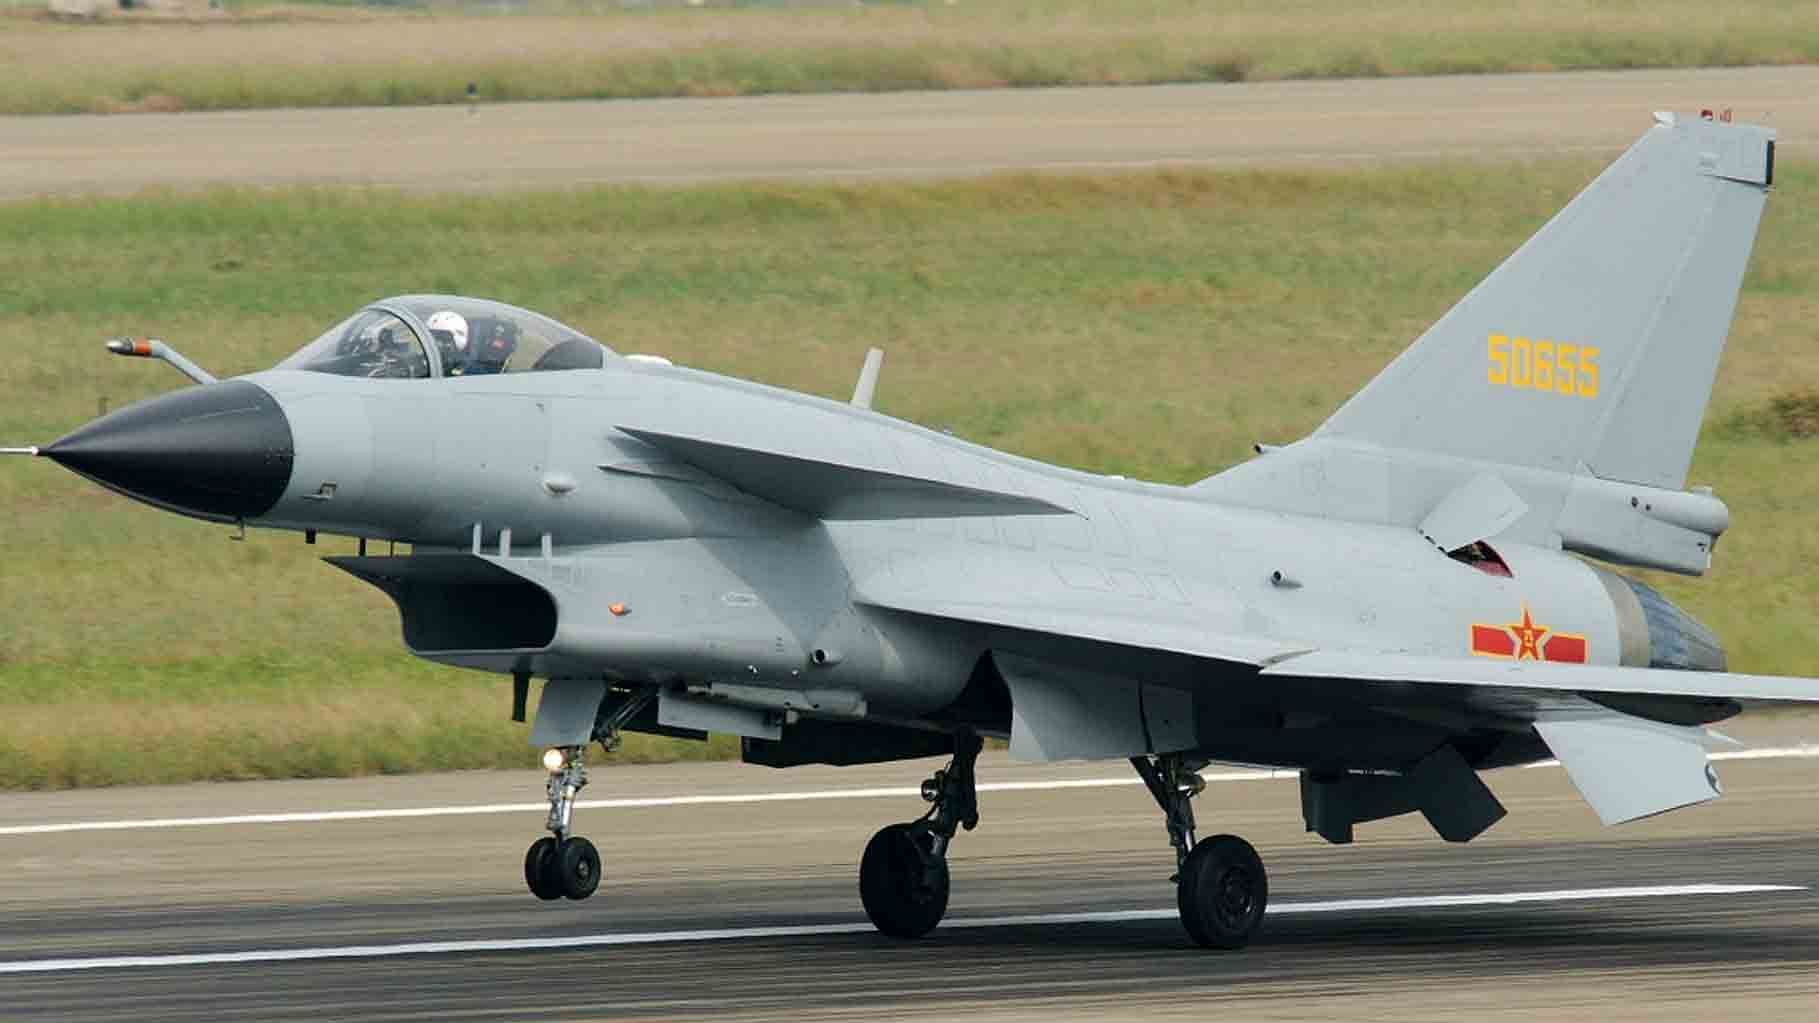 A J-10 Chinese fighter jet. (Photo: <a href="https://commons.wikimedia.org/w/index.php?title=User:Retxham&amp;action=edit&amp;redlink=1">Retxham</a>/Wikimedia)&nbsp;